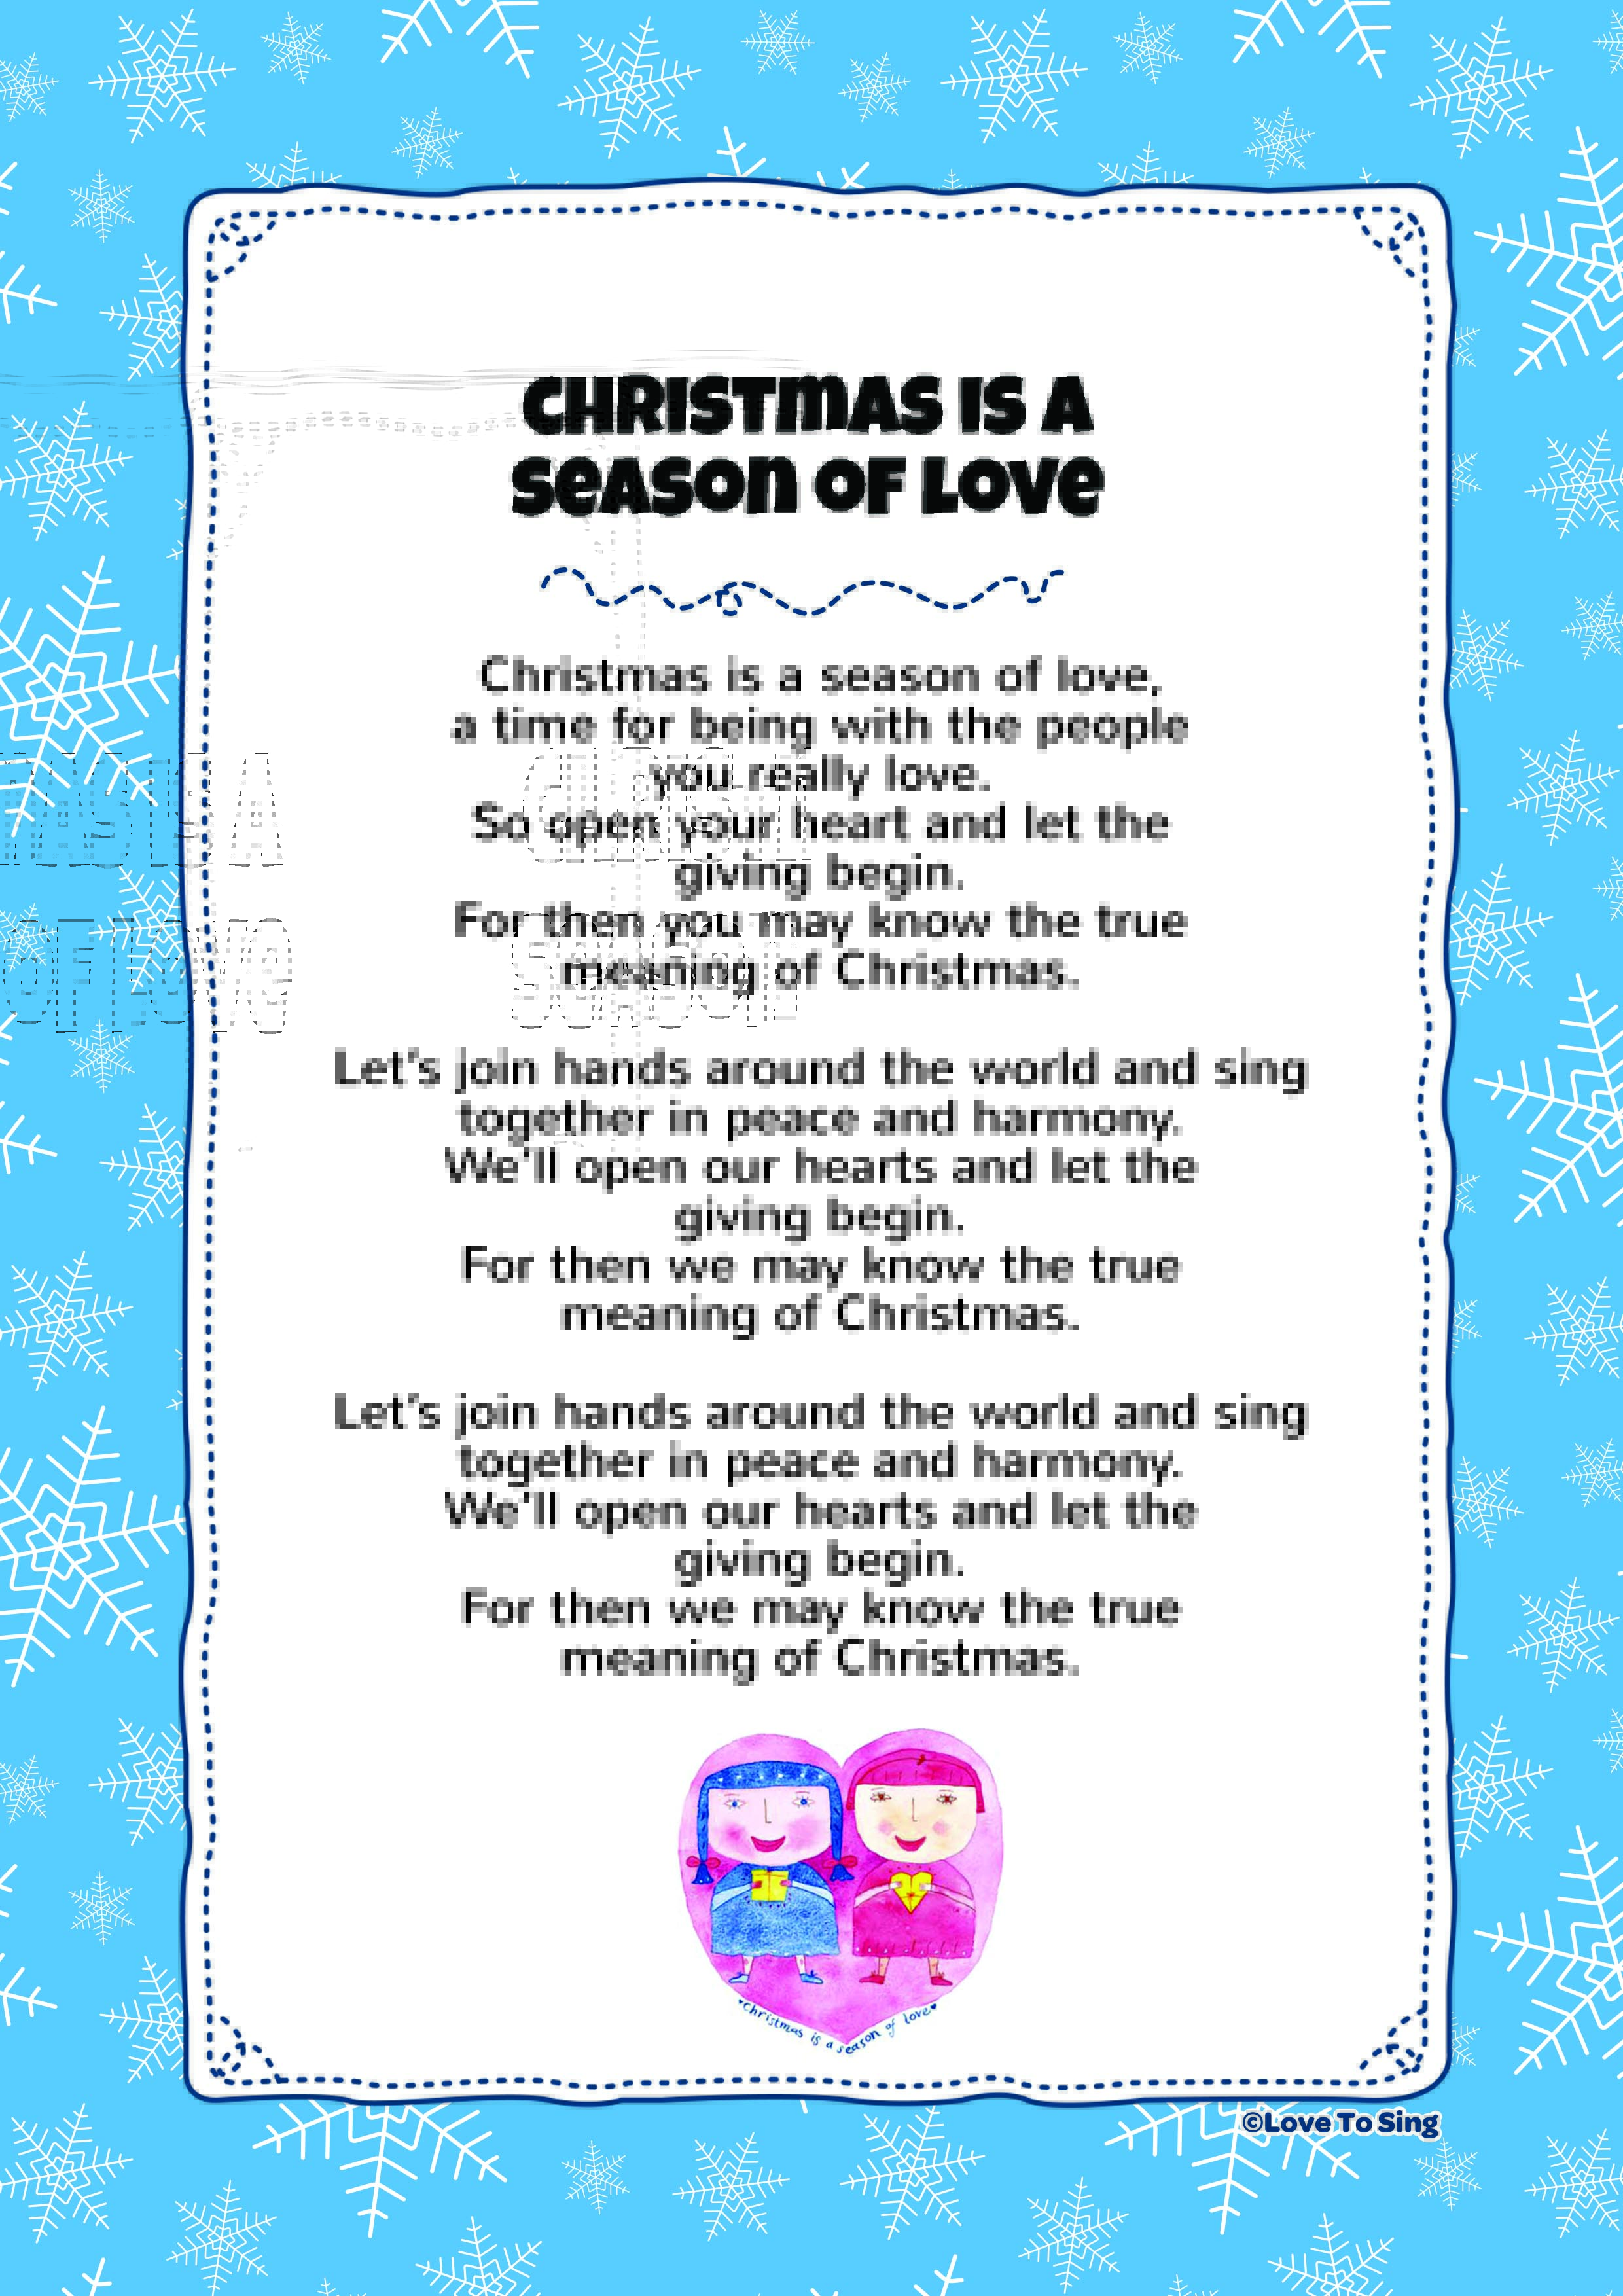 Christmas Is A Season Of Love | Kids Video Song with FREE Lyrics & Activities!